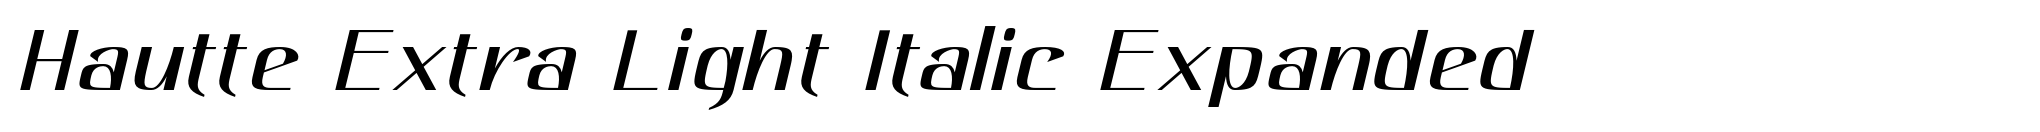 Hautte Extra Light Italic Expanded image